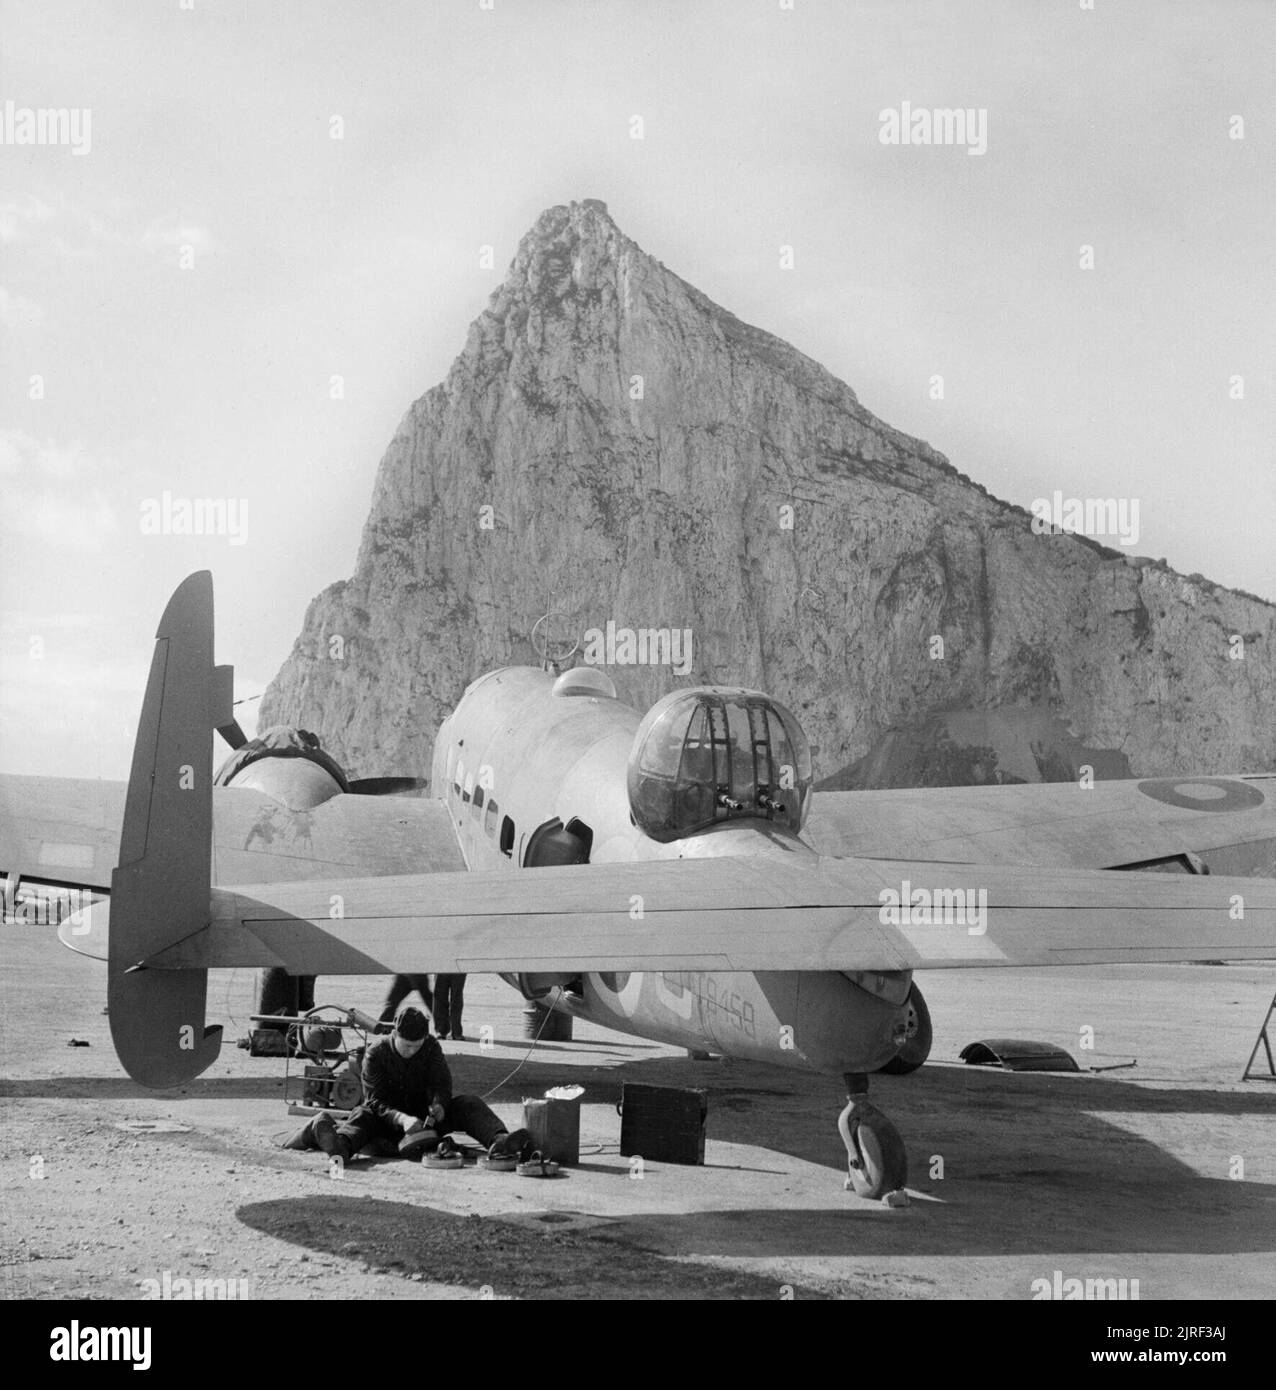 A Lockheed Hudson Mk III of No. 233 Squadron at North Front airfield at Gibraltar, March 1942. Hudson III T9459, part of No 233 Squadron's detachment at North Front airfield, with the famous Rock of Gibraltar providing a backdrop, March 1942. Stock Photo